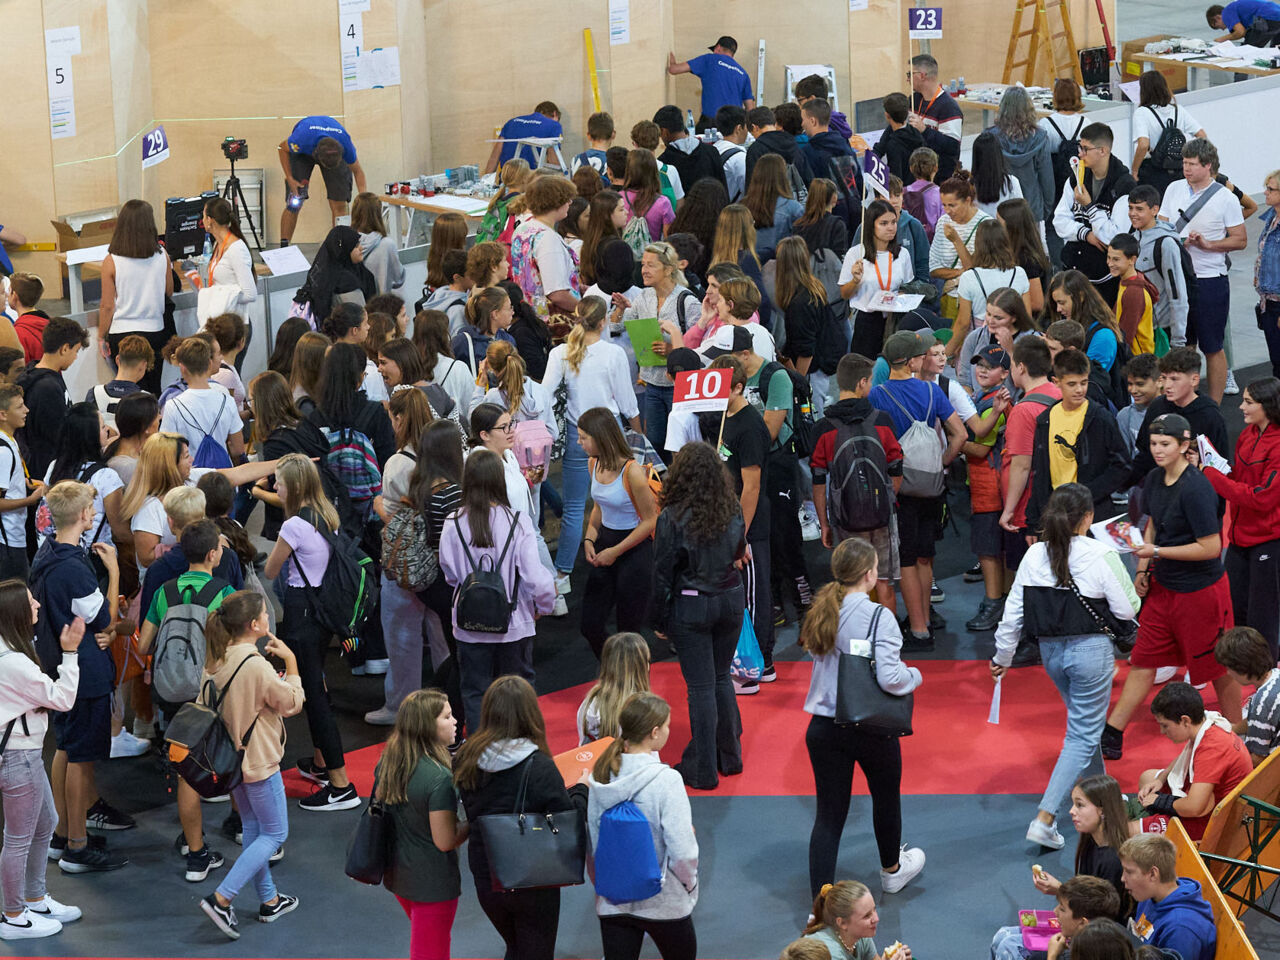 A crowd of school children watching the Competitors during the WorldSkills Italy nationals in Bolzano, South Tyrol.
